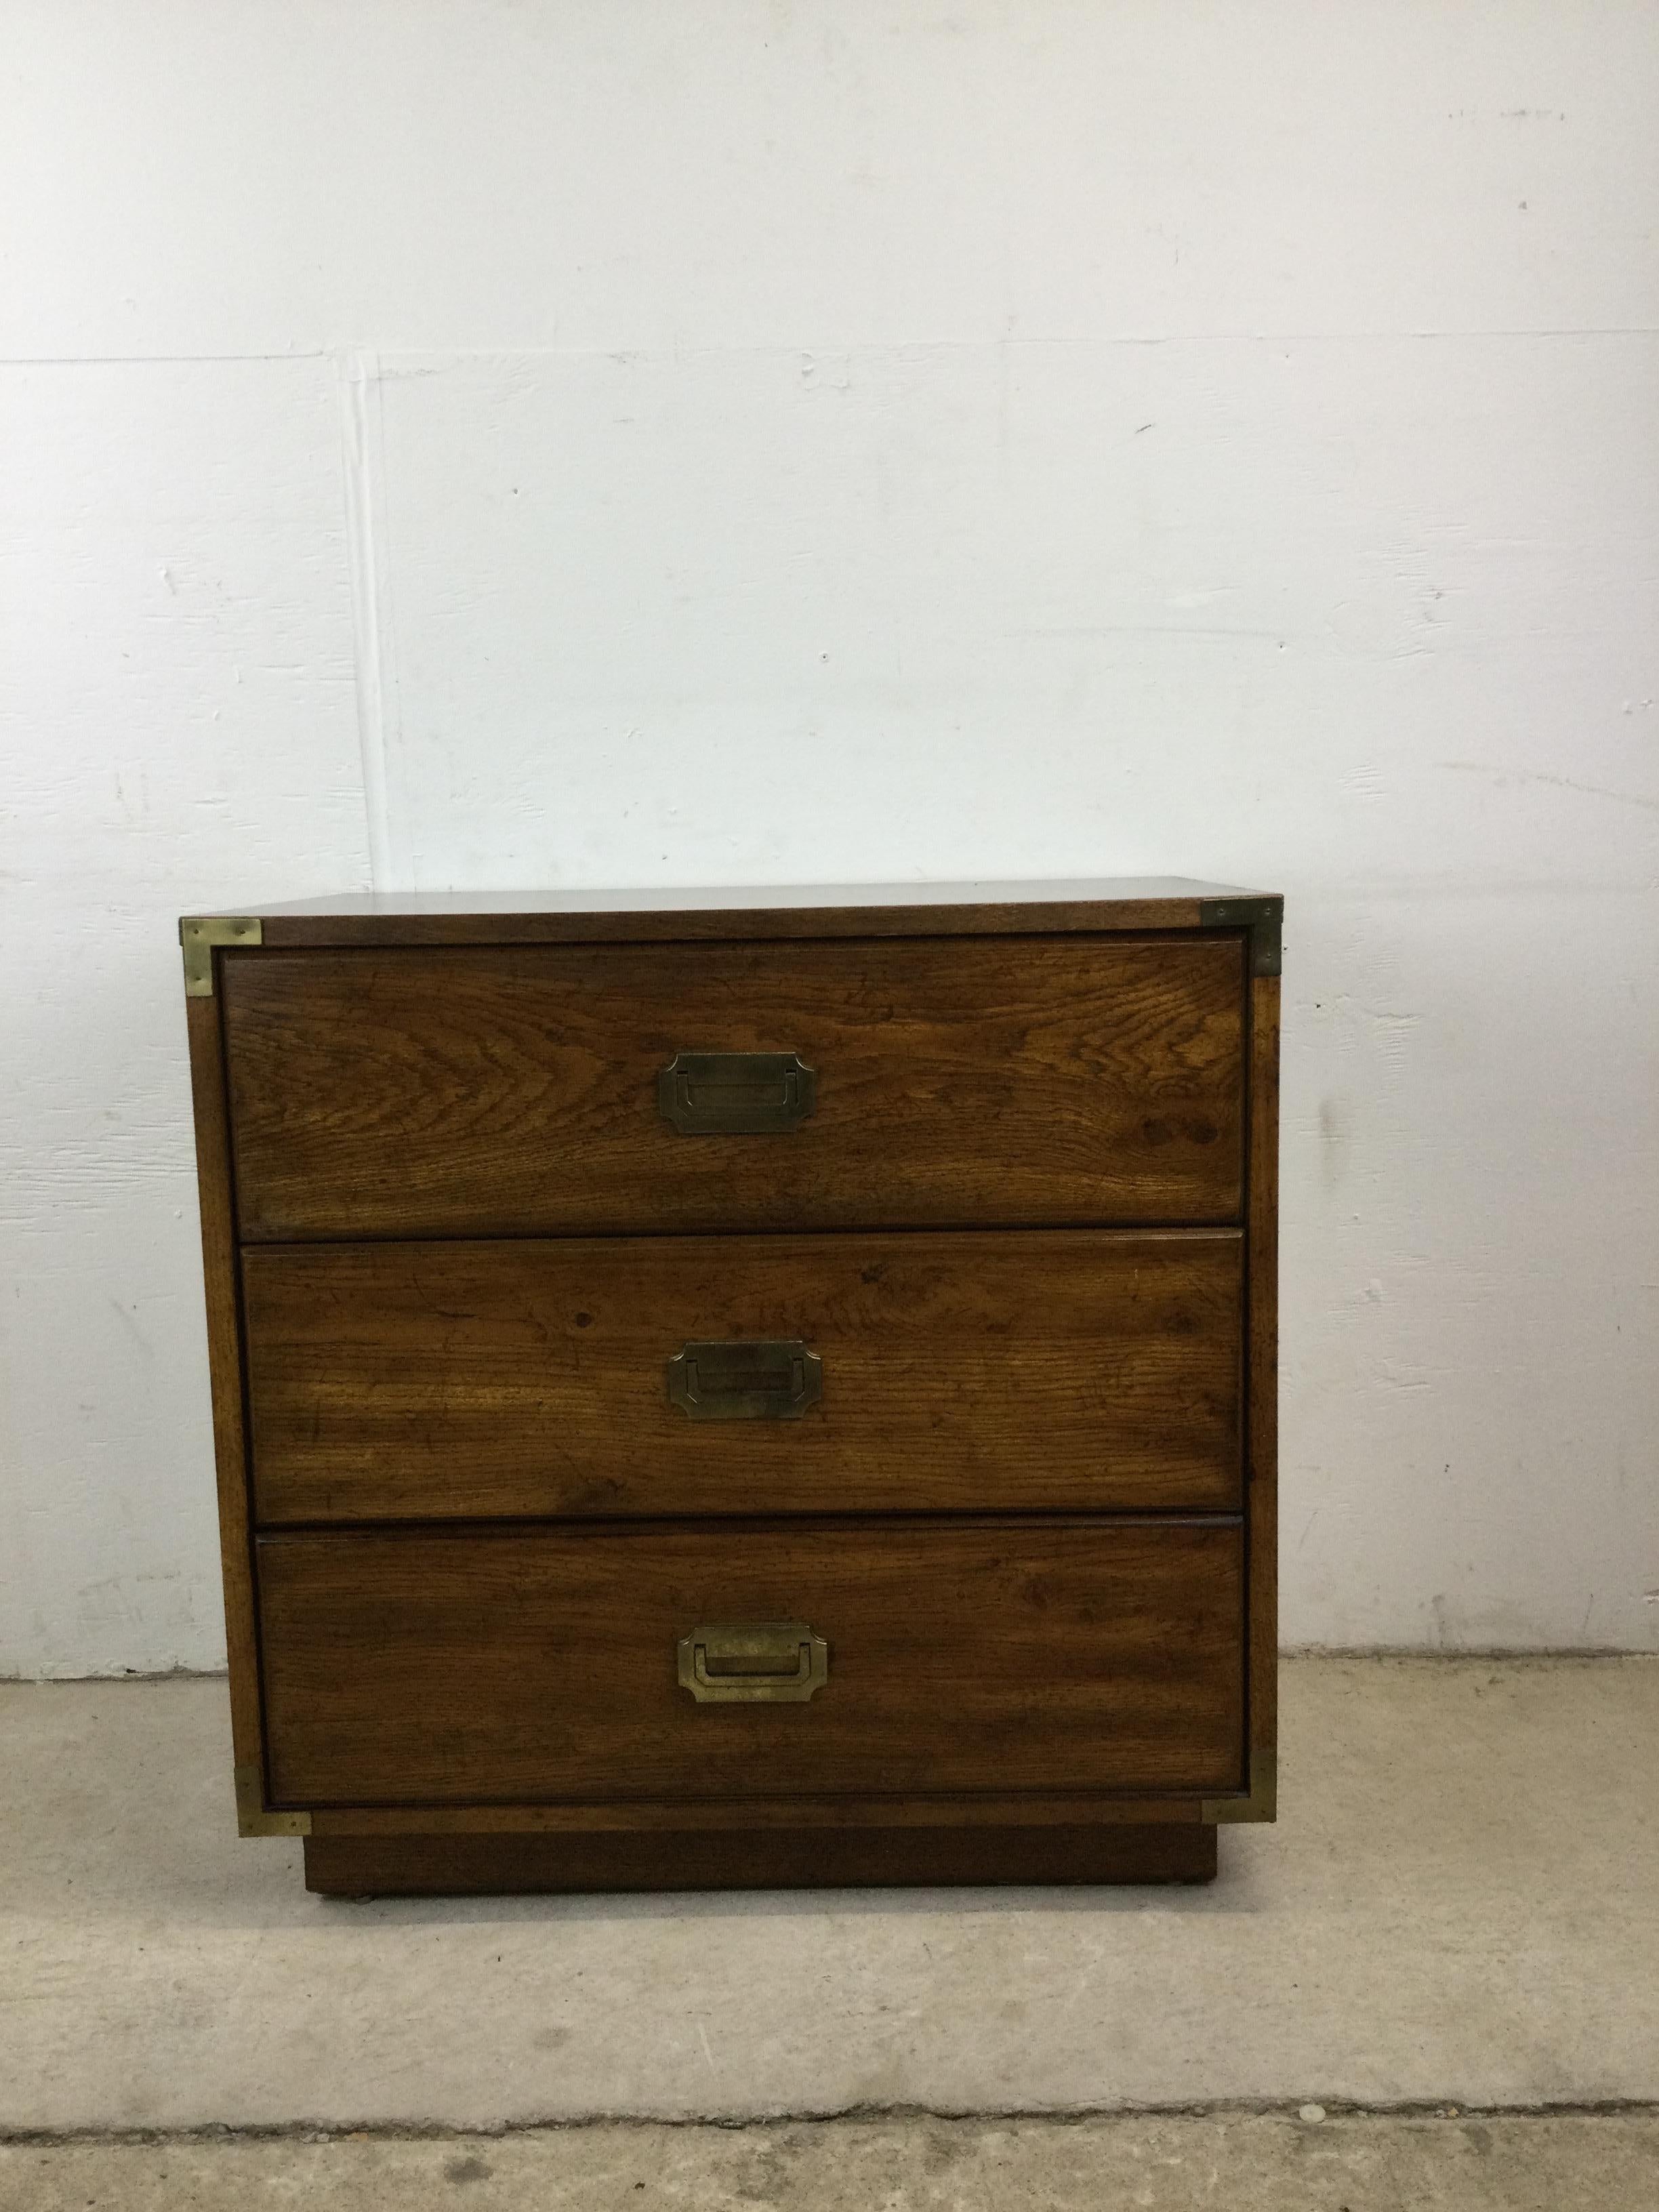 This mid century campaign style dresser features dark oak finish, durable vinyl top with faux wood grain, three dovetailed drawers, and brass accented hardware.

Matching three drawer chest & highboy dresser available separately.

Dimensions: 30w